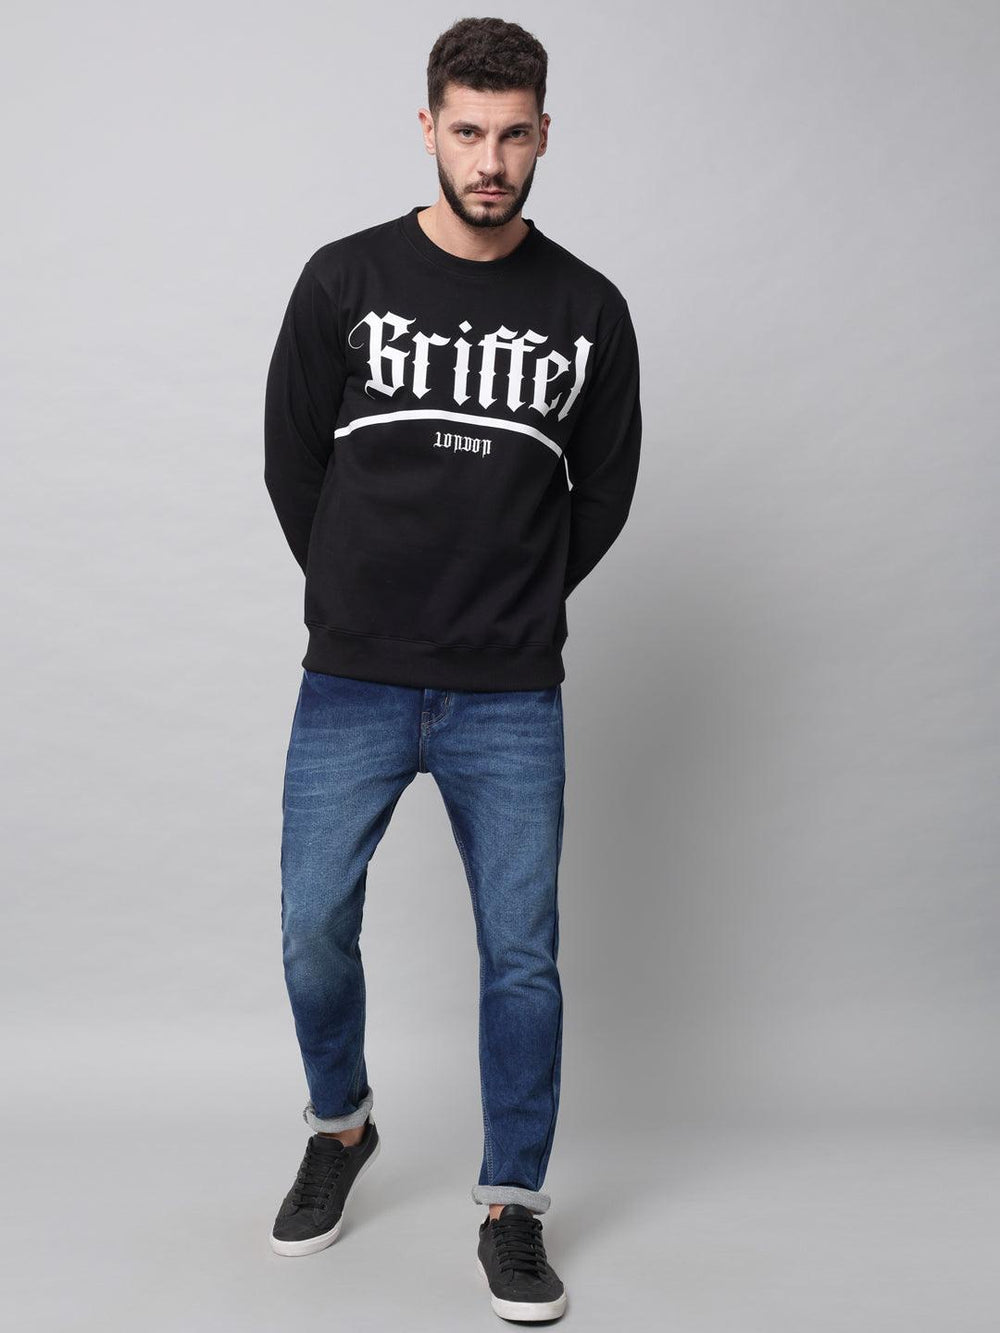 Griffel Men's Cotton Fleece Round Neck Sweatshirt with Full Sleeve and Front Print - griffel